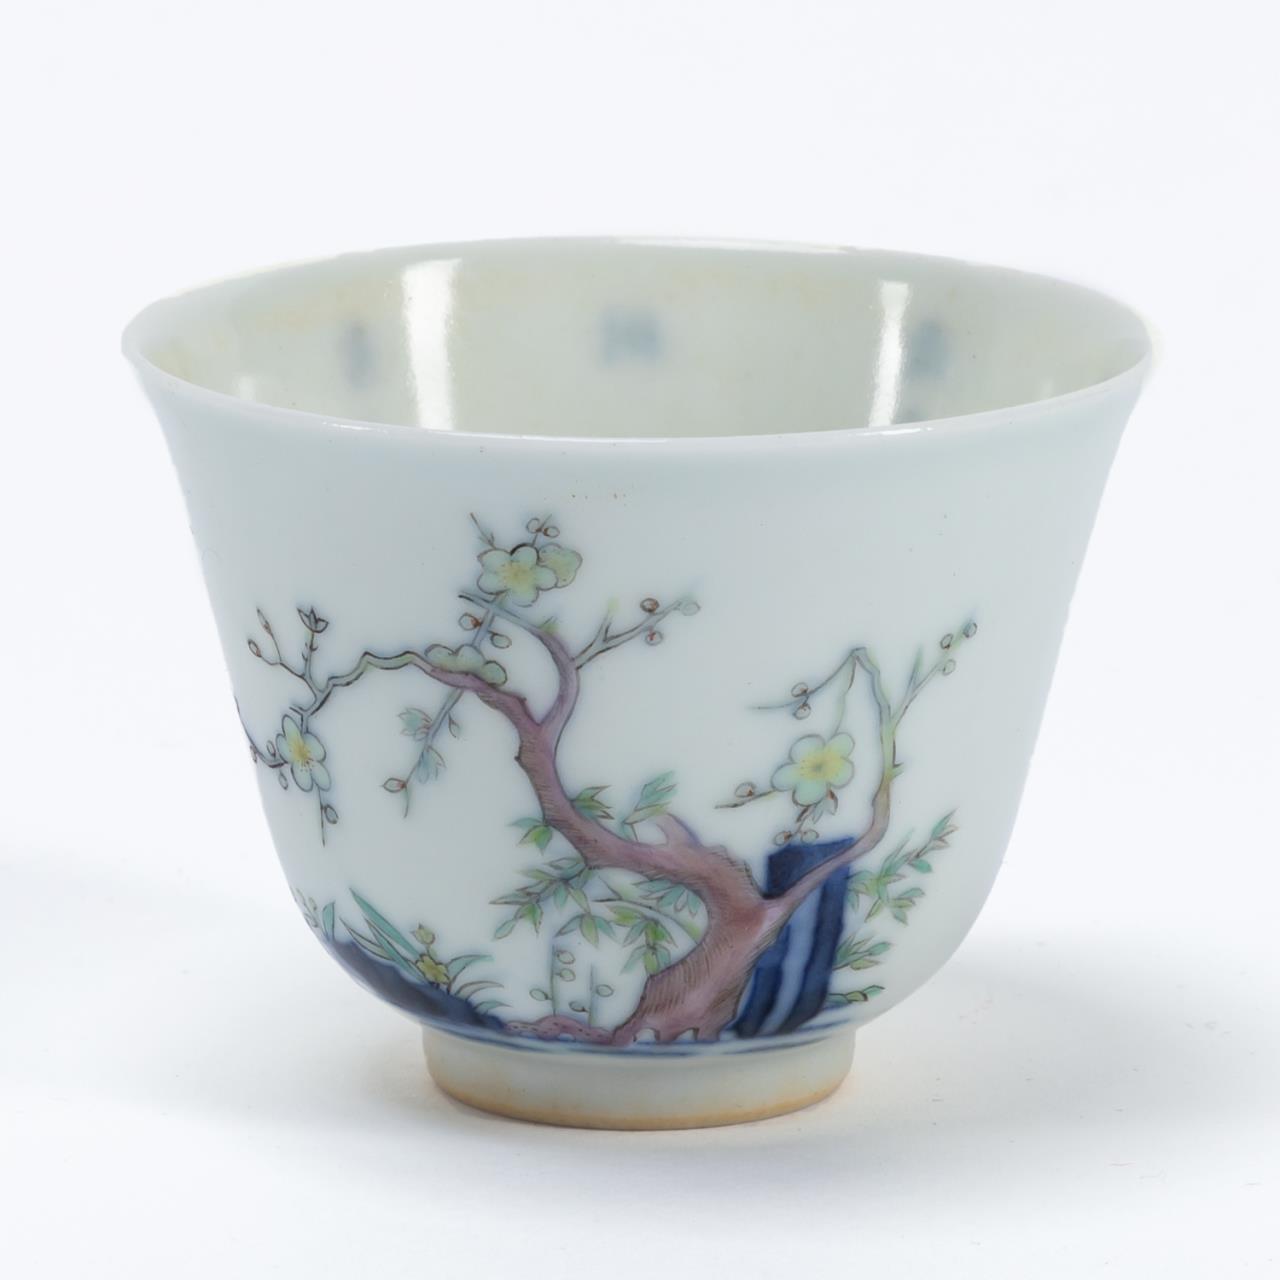 SMALL CHINESE PORCELAIN CUP WITH